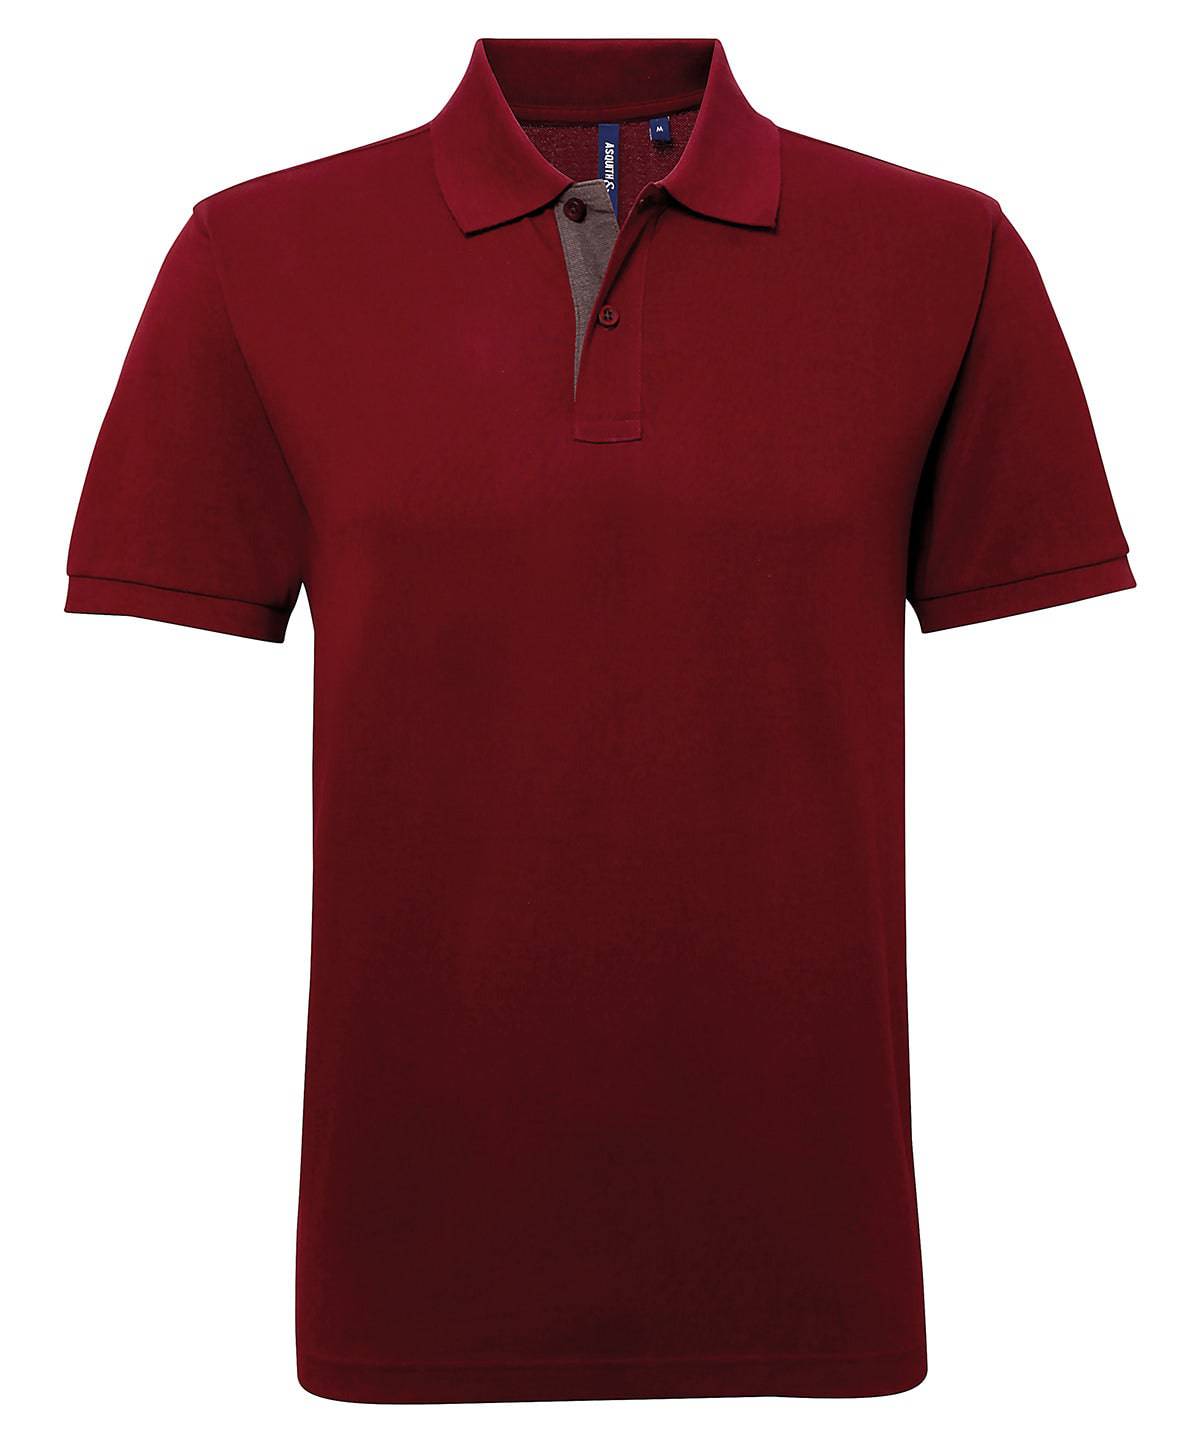 Burgundy/Charcoal - Men's classic fit contrast polo